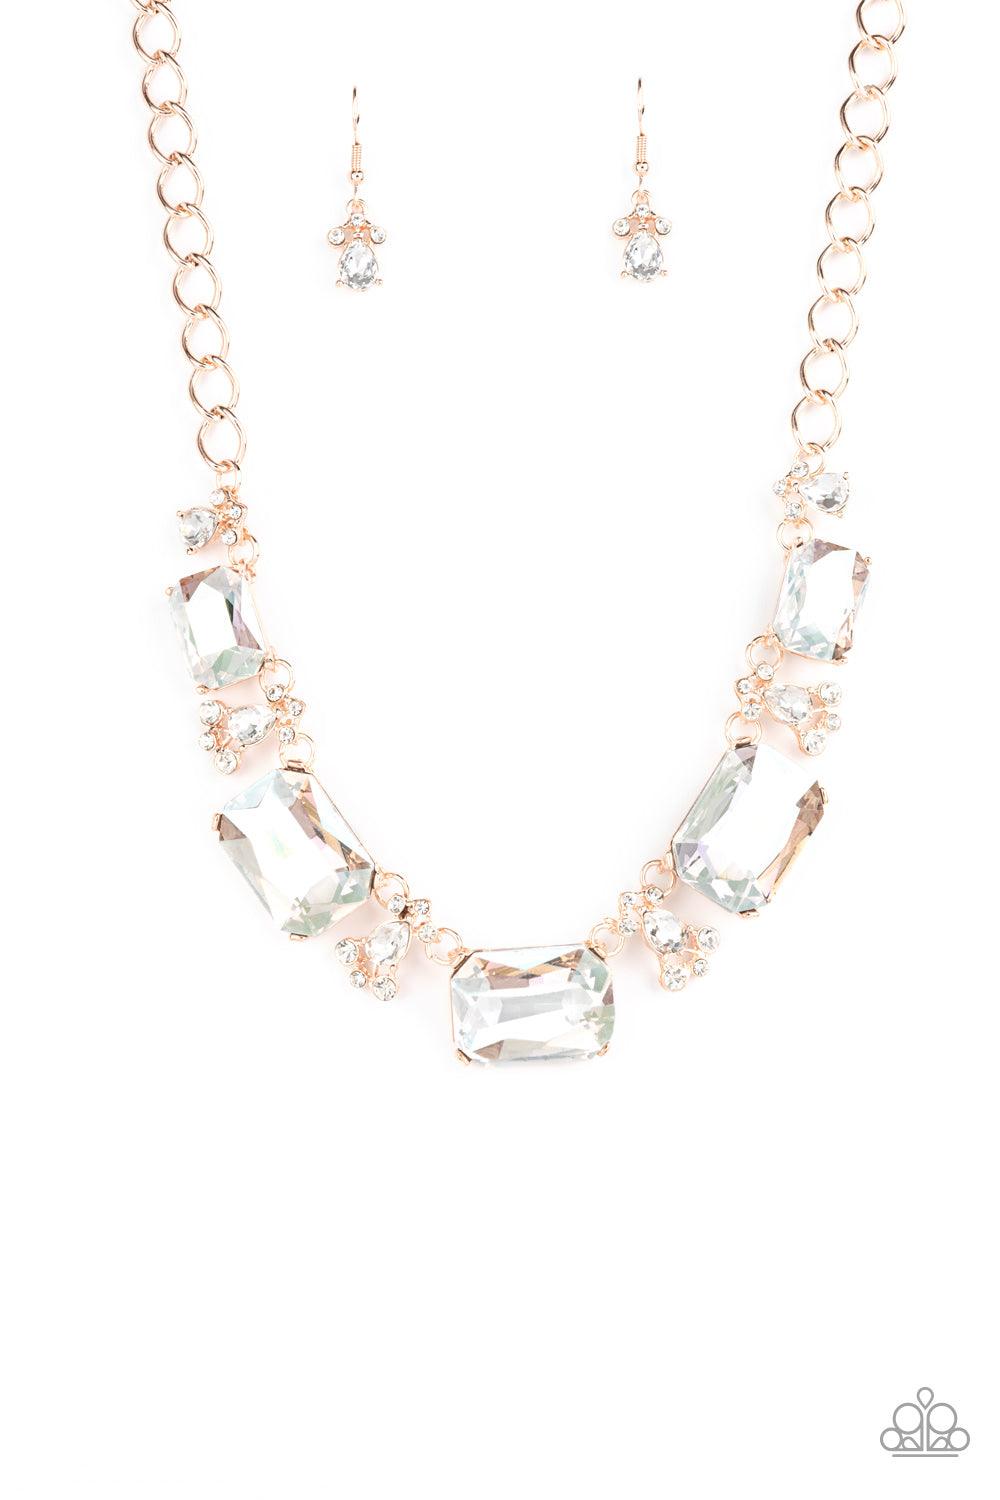 Paparazzi Accessories Flawlessly Famous - Multi Encased in sleek rose gold fittings, an oversized collection of emerald cut white rhinestones link with rhinestone dotted teardrop rhinestone frames below the collar for a jaw-dropping display. Features an a